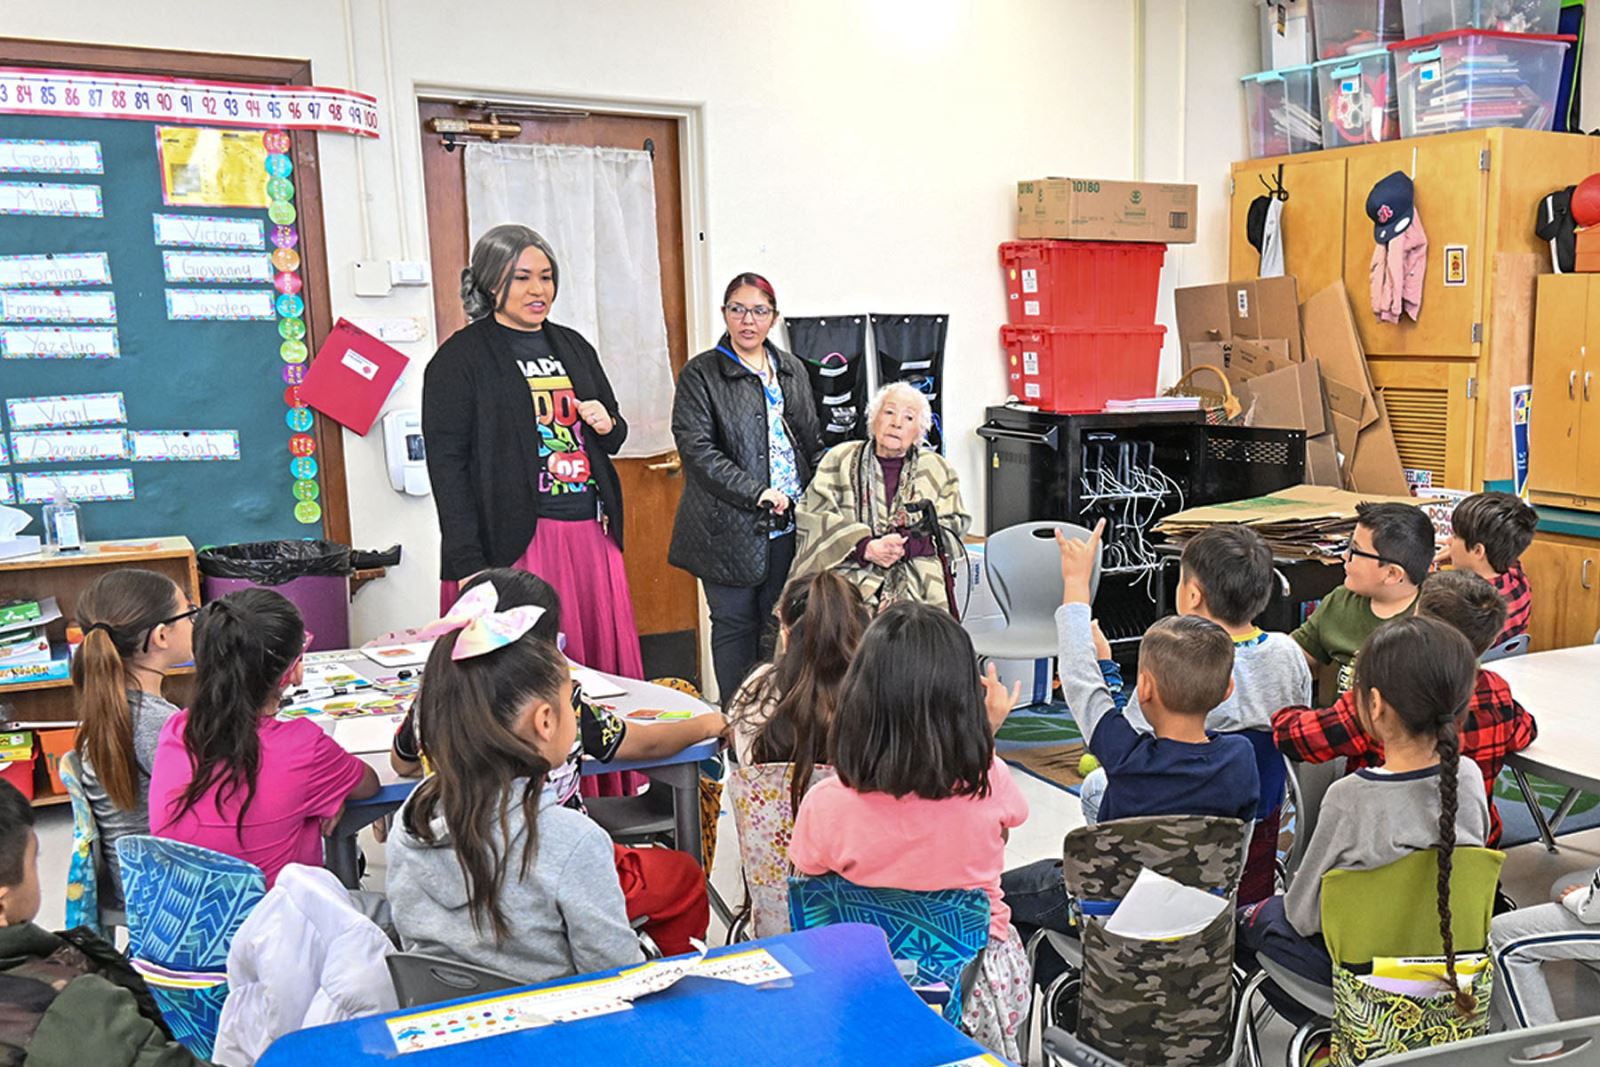 Delores Ortiz talks to students on the 100th day of school